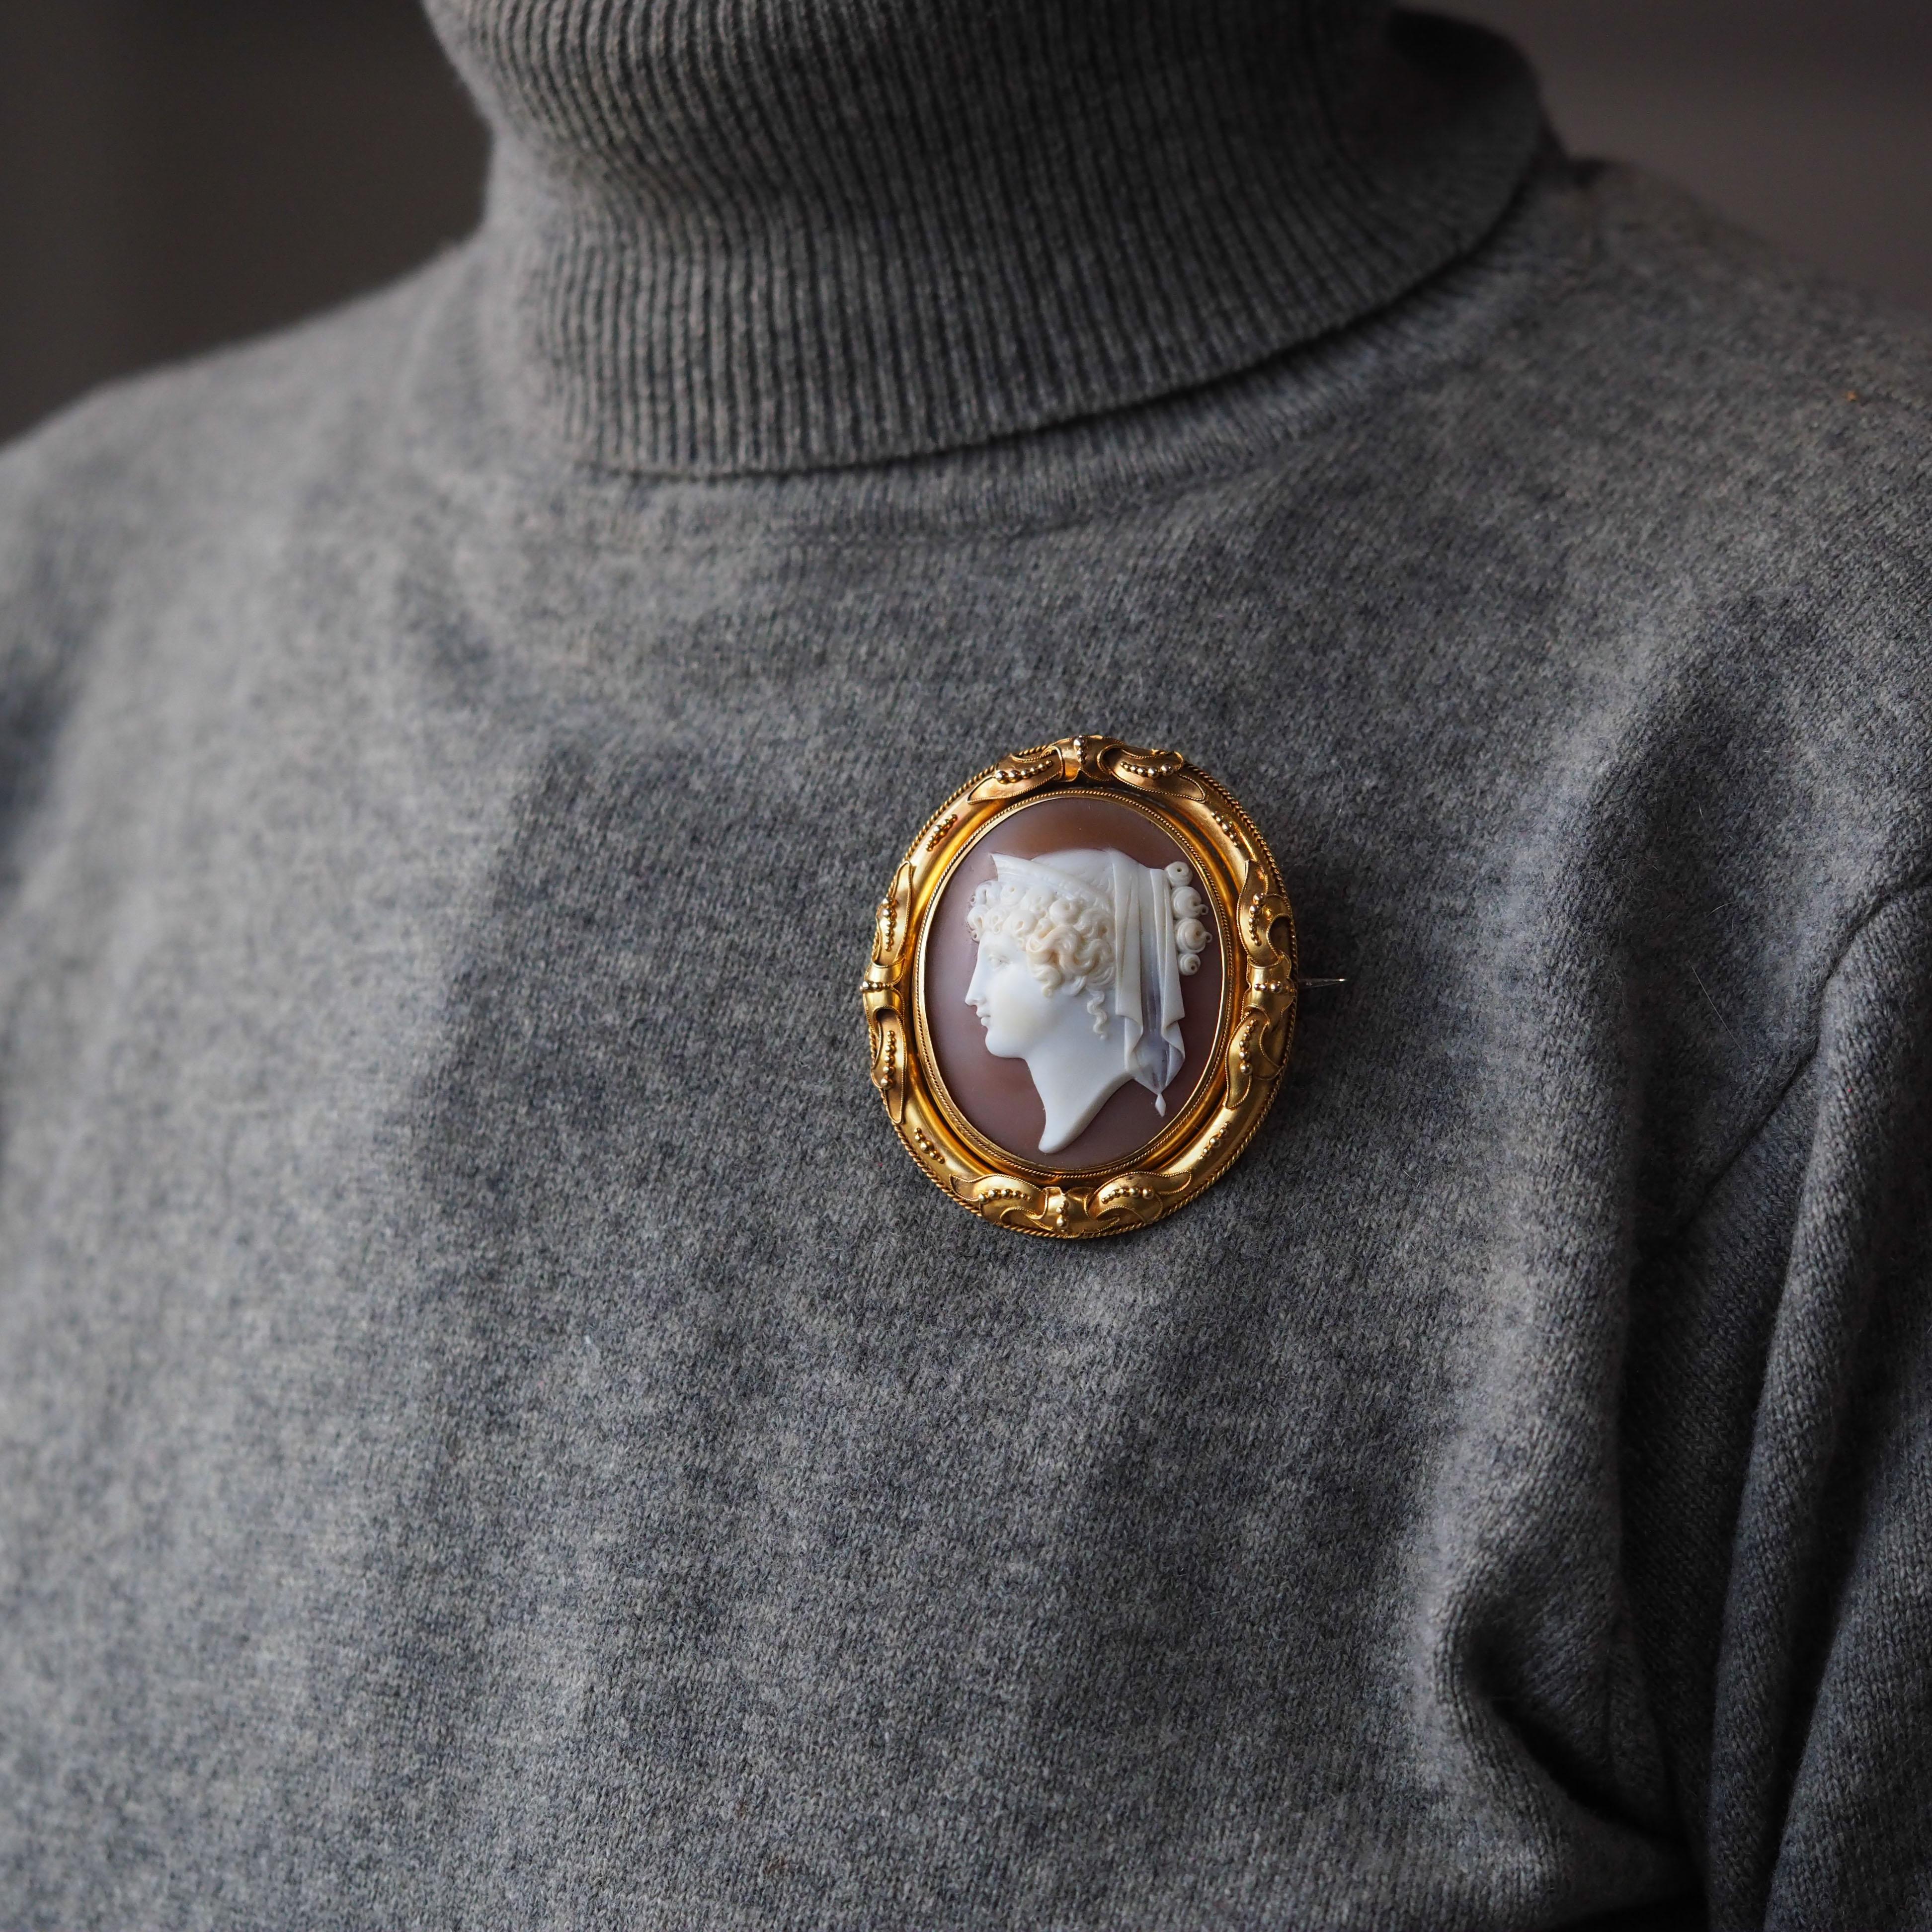 Antique Cameo Brooch Pendant Necklace 18K Gold - Victorian c.1860 In Good Condition For Sale In London, GB